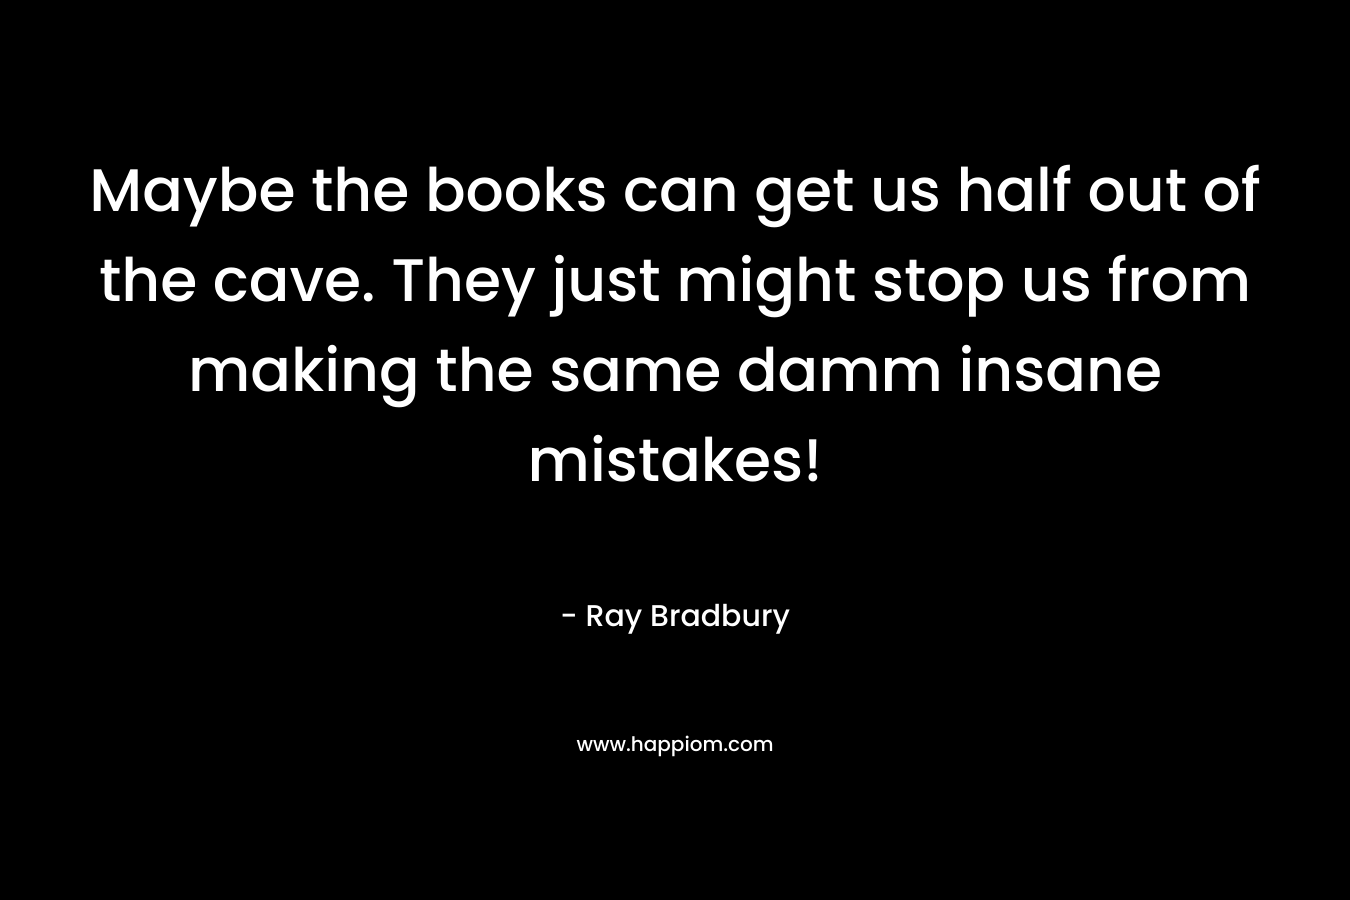 Maybe the books can get us half out of the cave. They just might stop us from making the same damm insane mistakes!